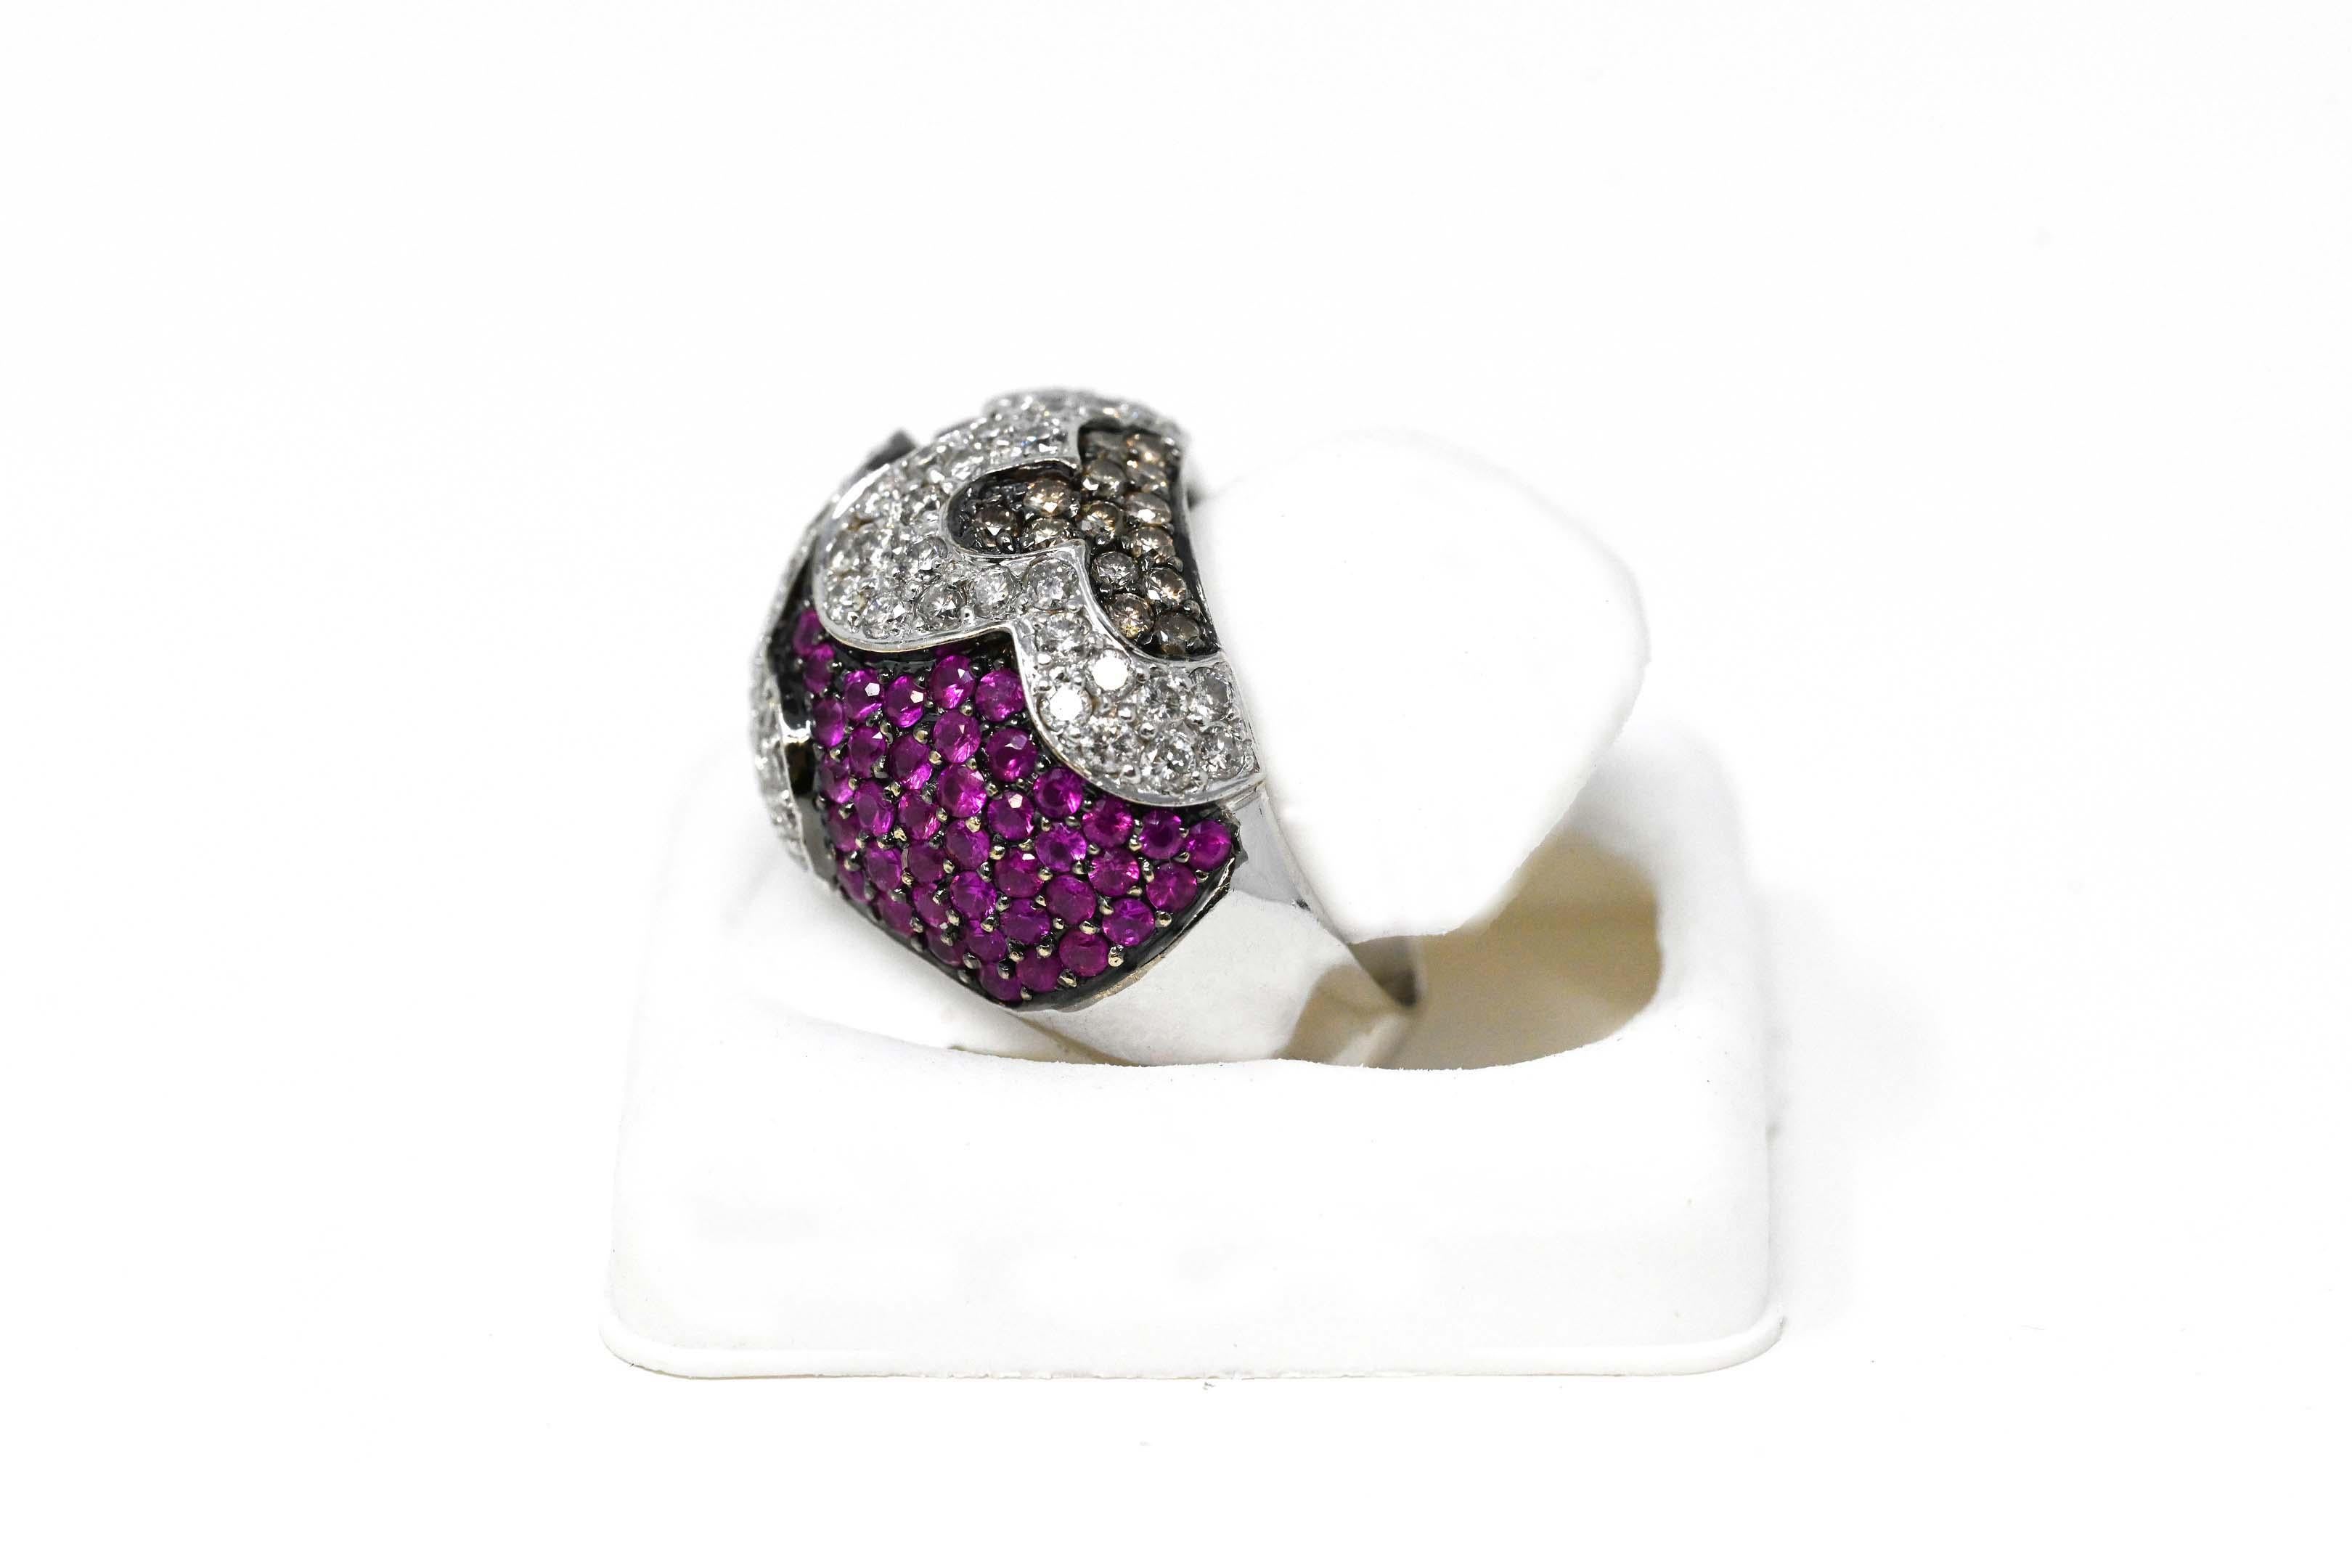 One ladies ring in white 18 karat gold, stamped, cabochon floral pave style. Has a polished and white/black rhodium finish, Total weight of 10.6 grams. The ring is set with sixty-eight round brilliant cut diamonds, average weight: 0.015-0.02 carats